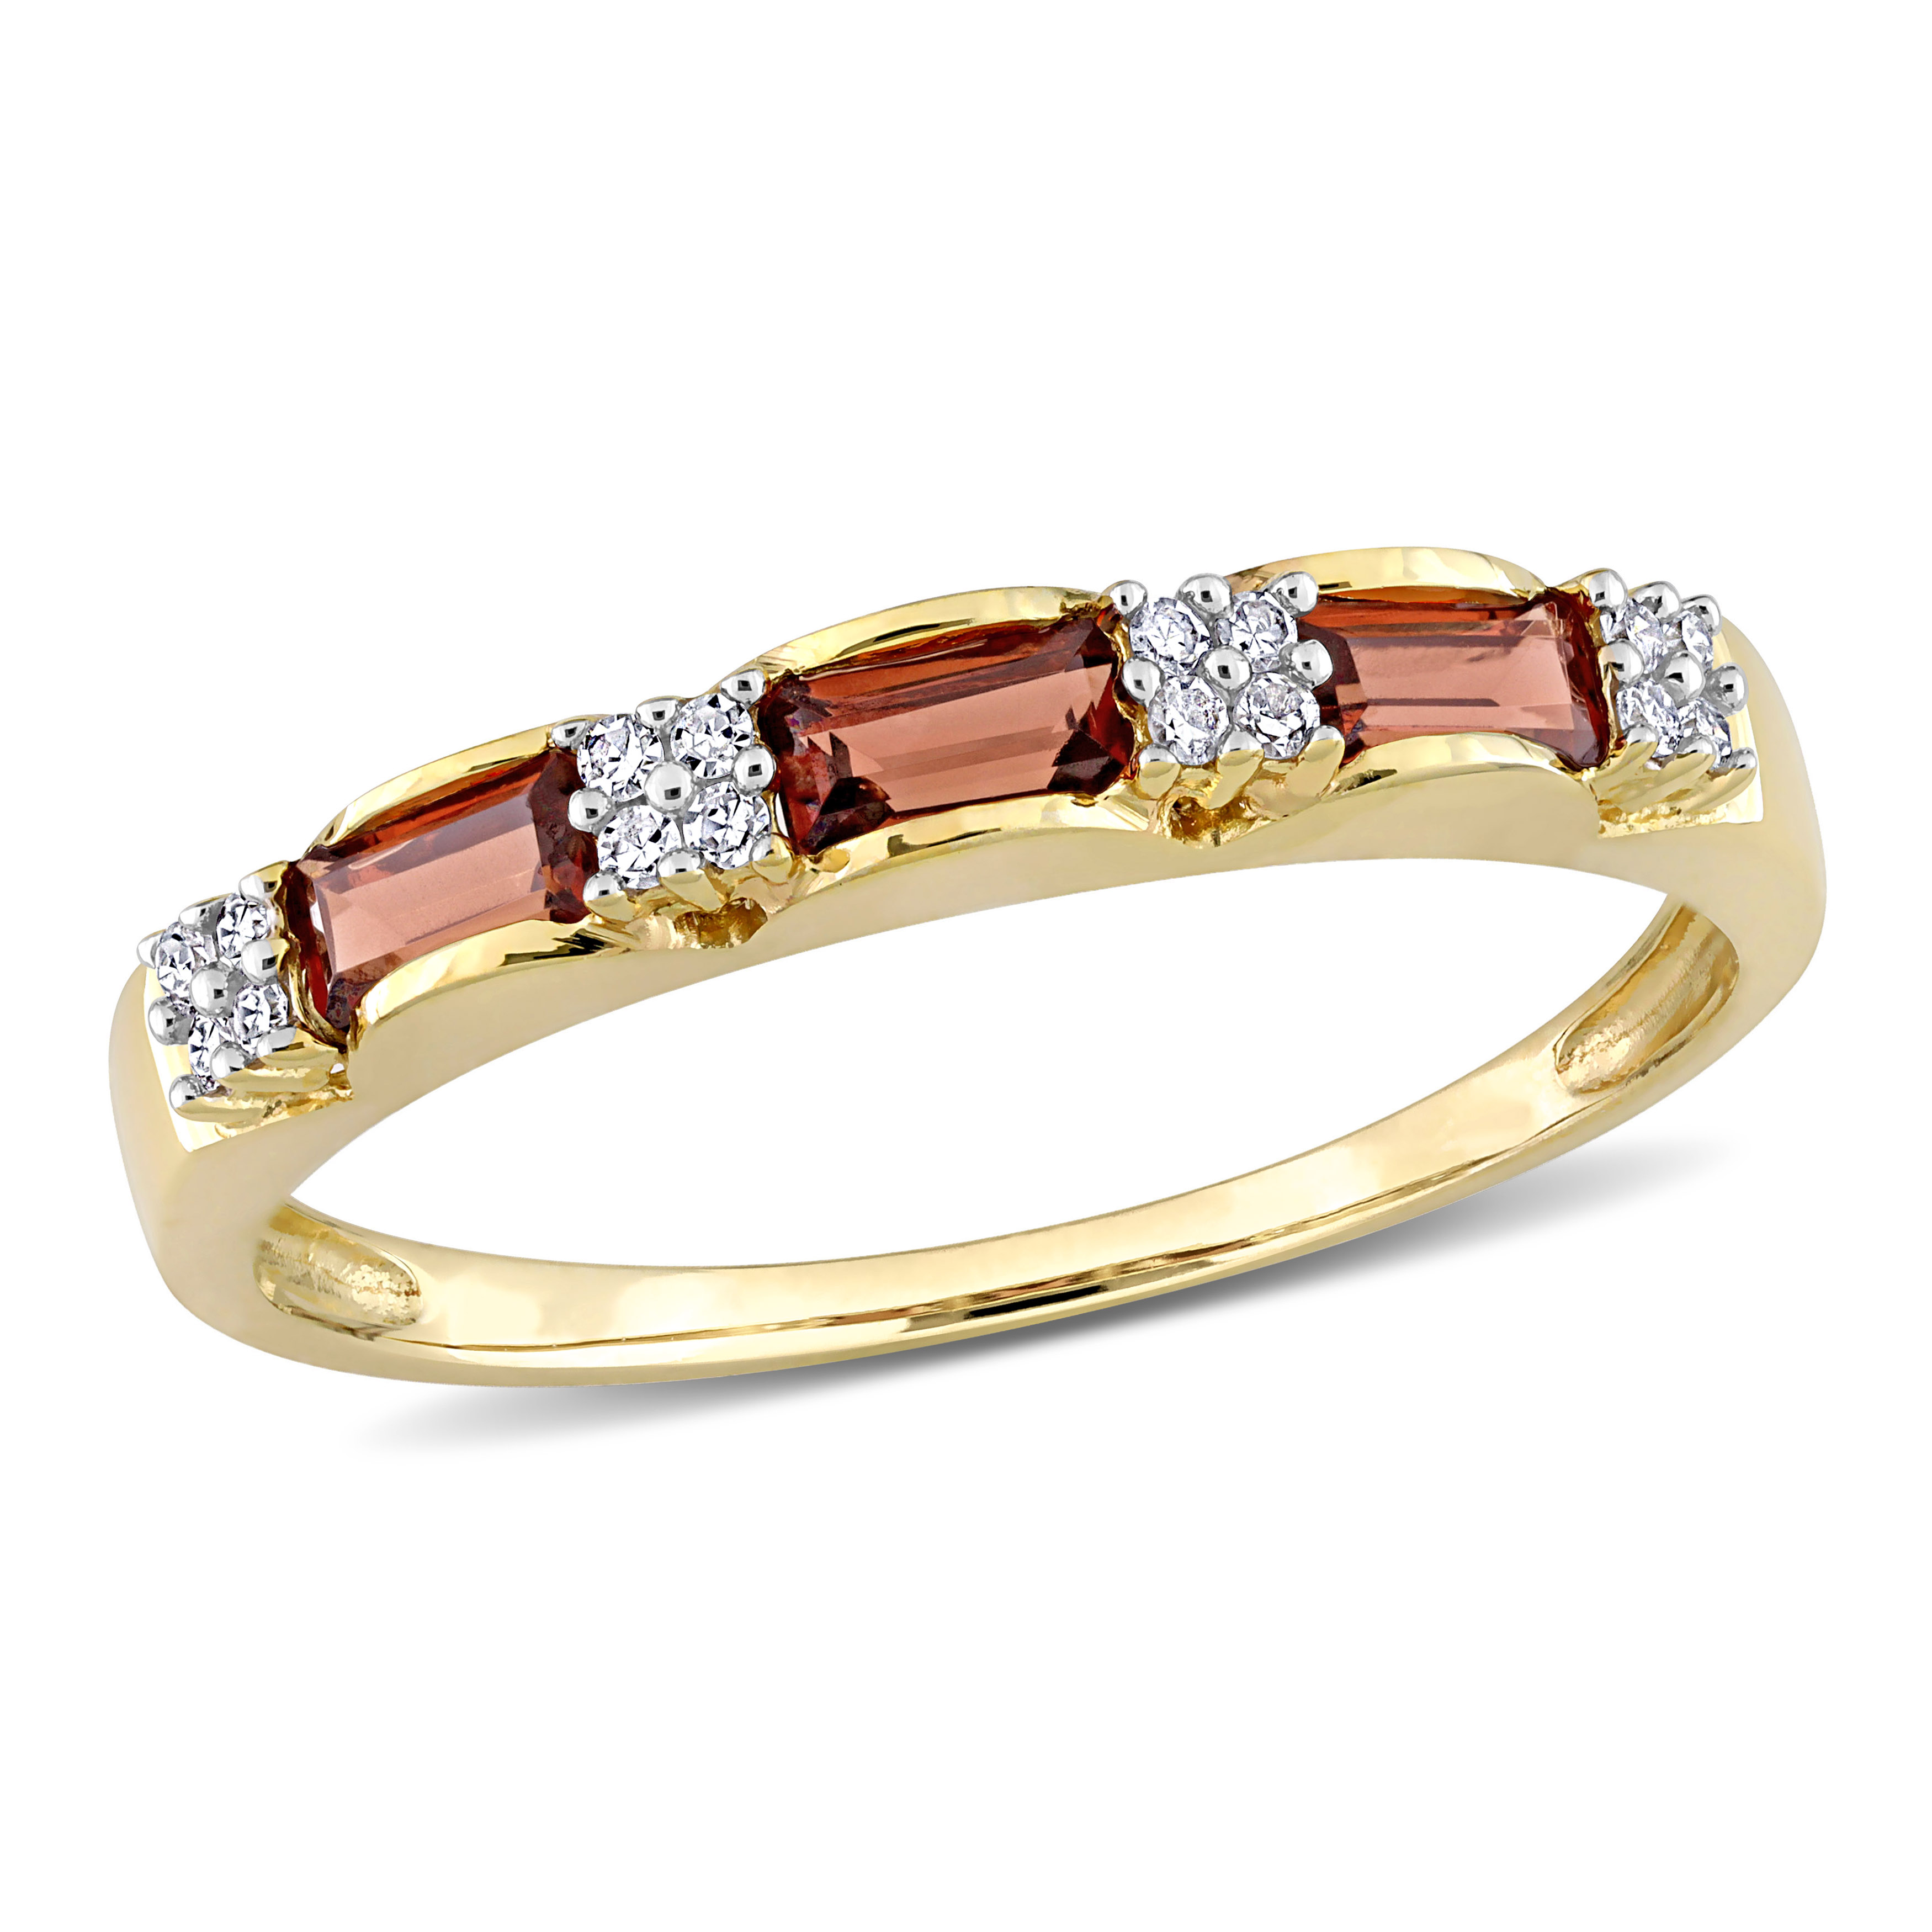 1/2 CT TGW Garnet and Diamond Accent Eternity Ring in 10k Yellow Gold